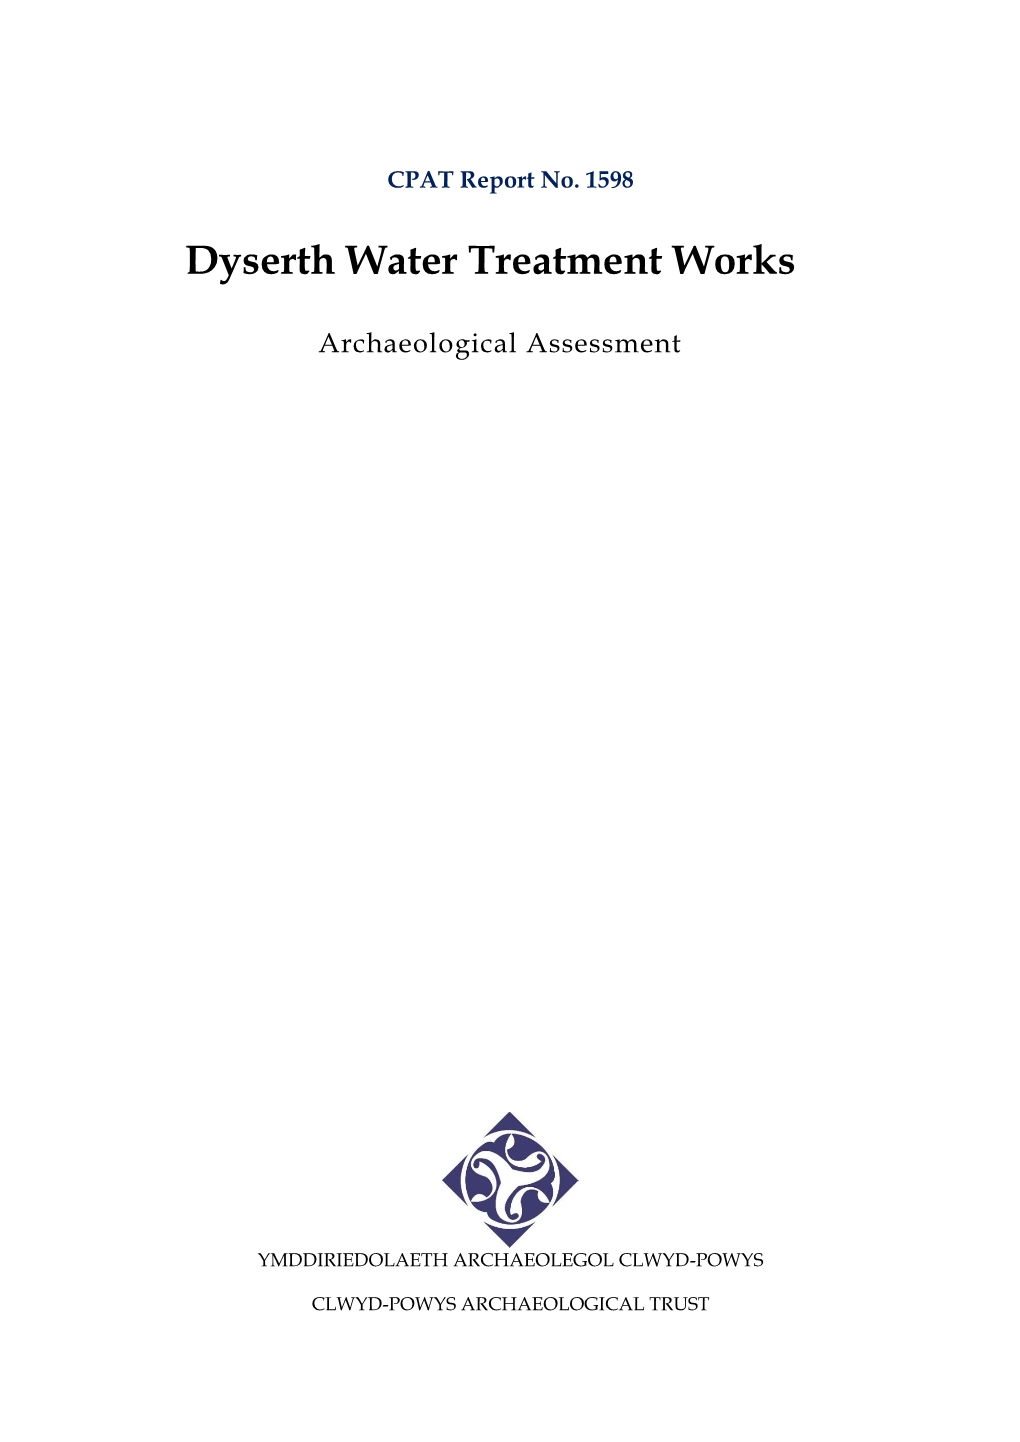 Dyserth Water Treatment Works